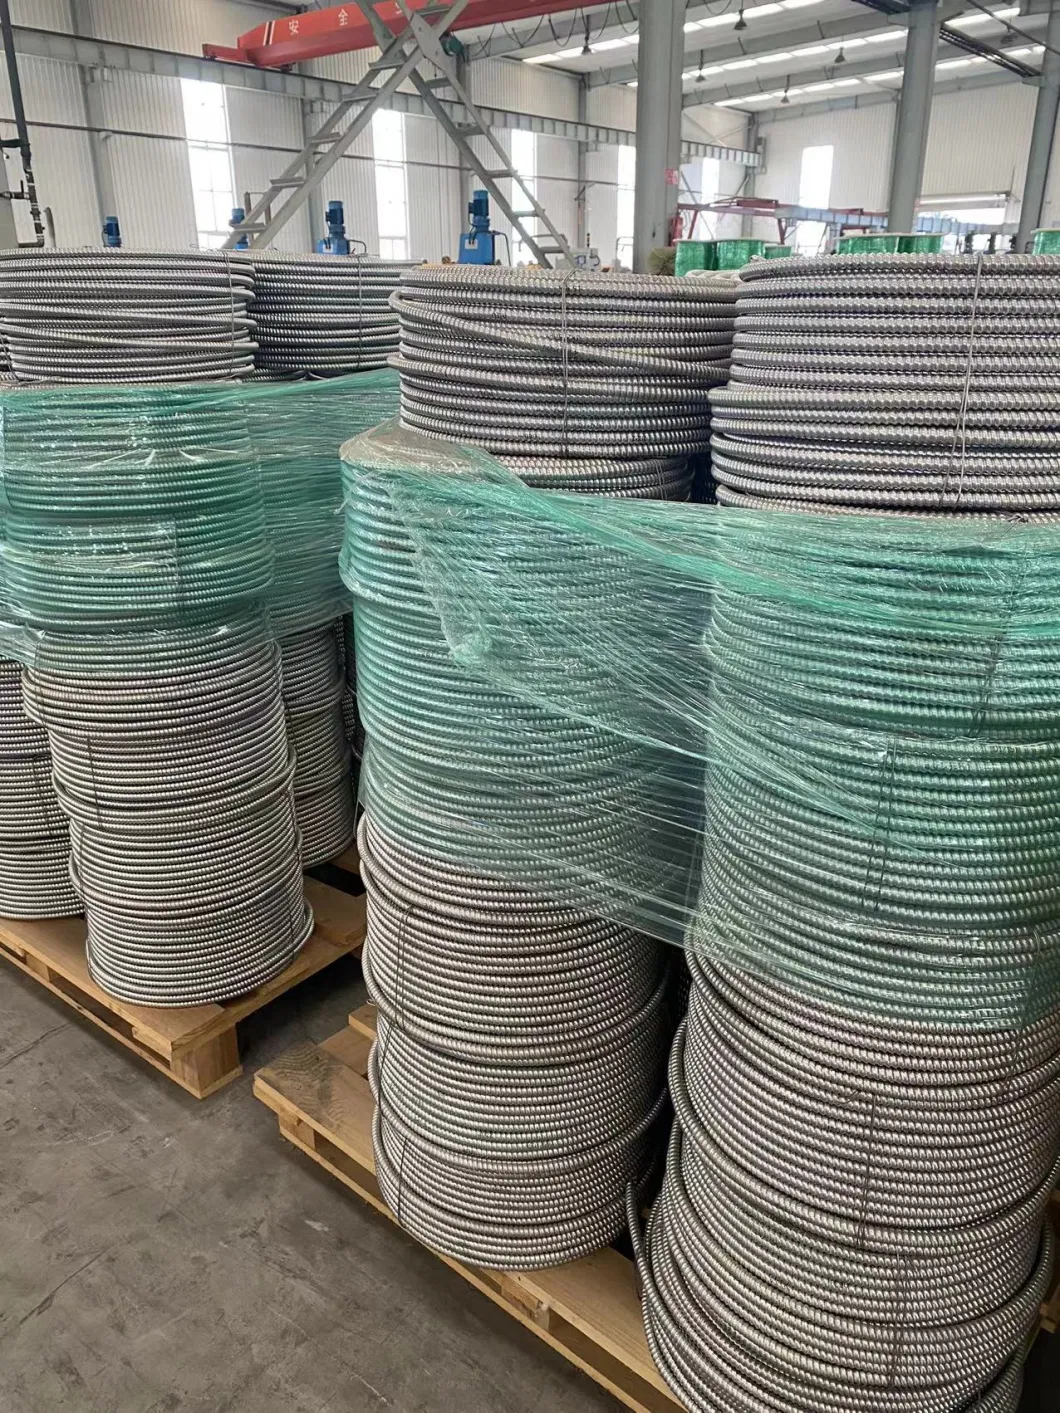 UL1569 Low Voltage Metal Clad Wire 16/2 14/2 12/2 AWG Aluminum Armored Thhn Thwn-2 Electrical Power Building Wire Mc Cable